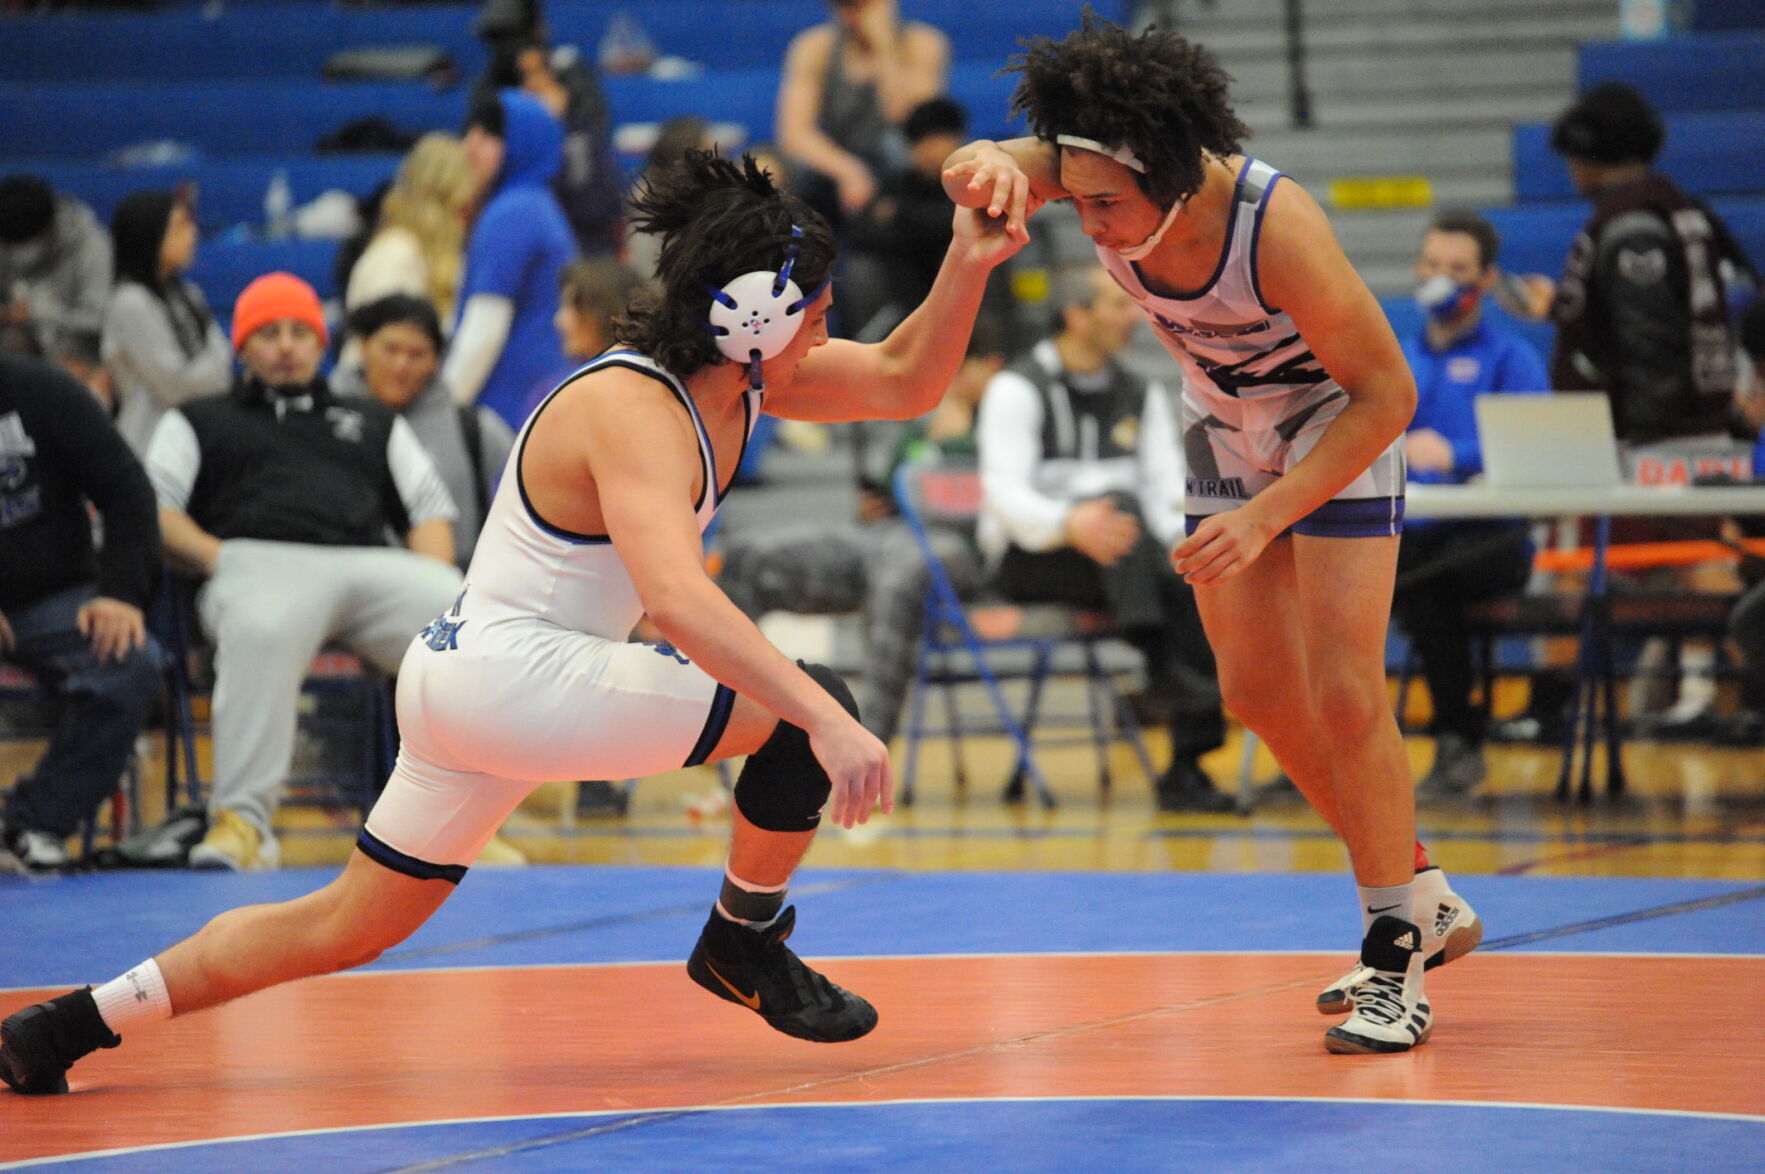 High school wrestling County wrestlers win 2 sectional titles, 4 more advance to D-1 State Meet